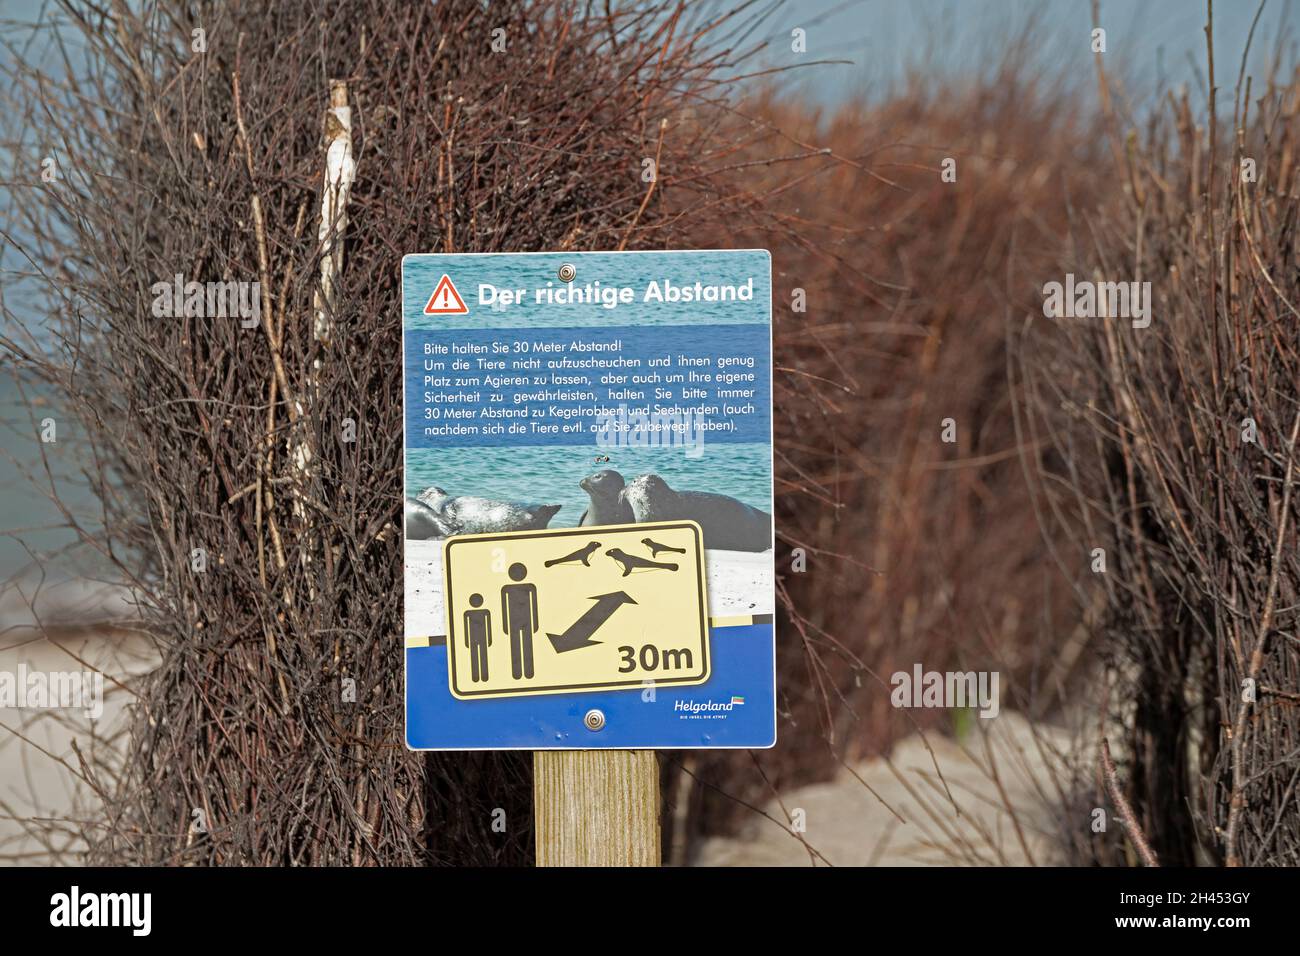 Signpost asking people to keep a distance of 30 meters to seals, Düne, Heligoland Island, Schleswig-Holstein, Germany Stock Photo